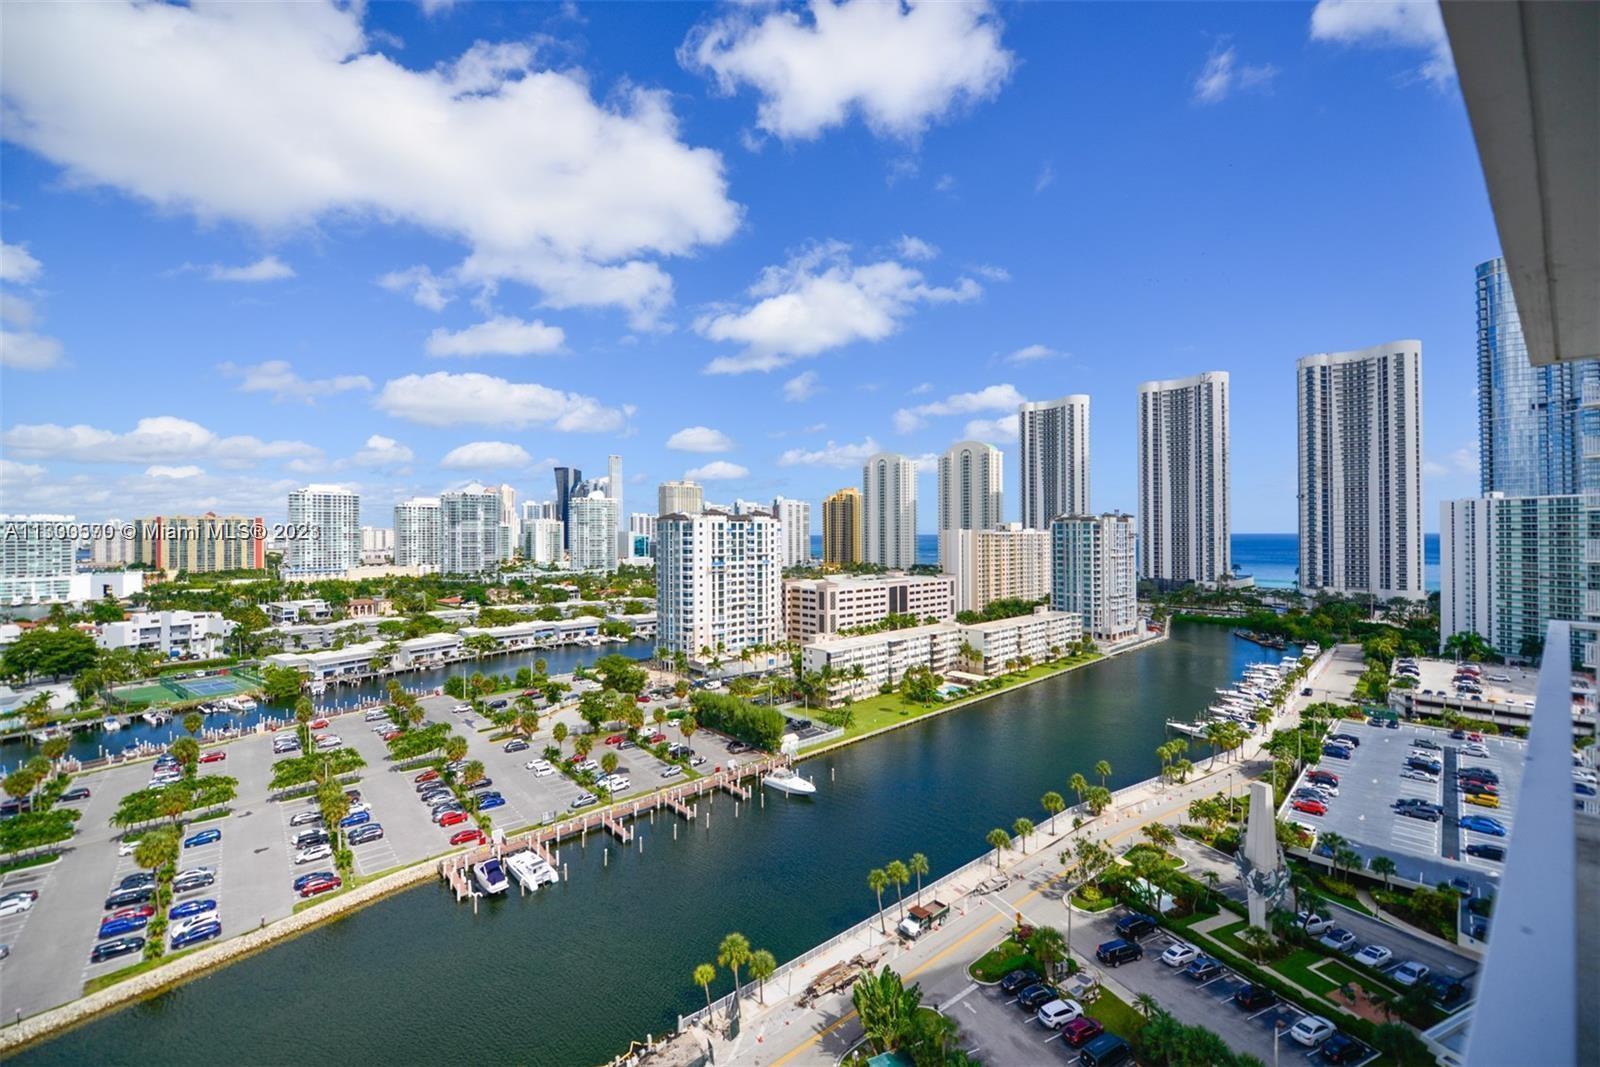 Location,walk to the beach,A rated Norman S. Edelcup/Sunny Isles Beach K-8 school. Arlen house is a 